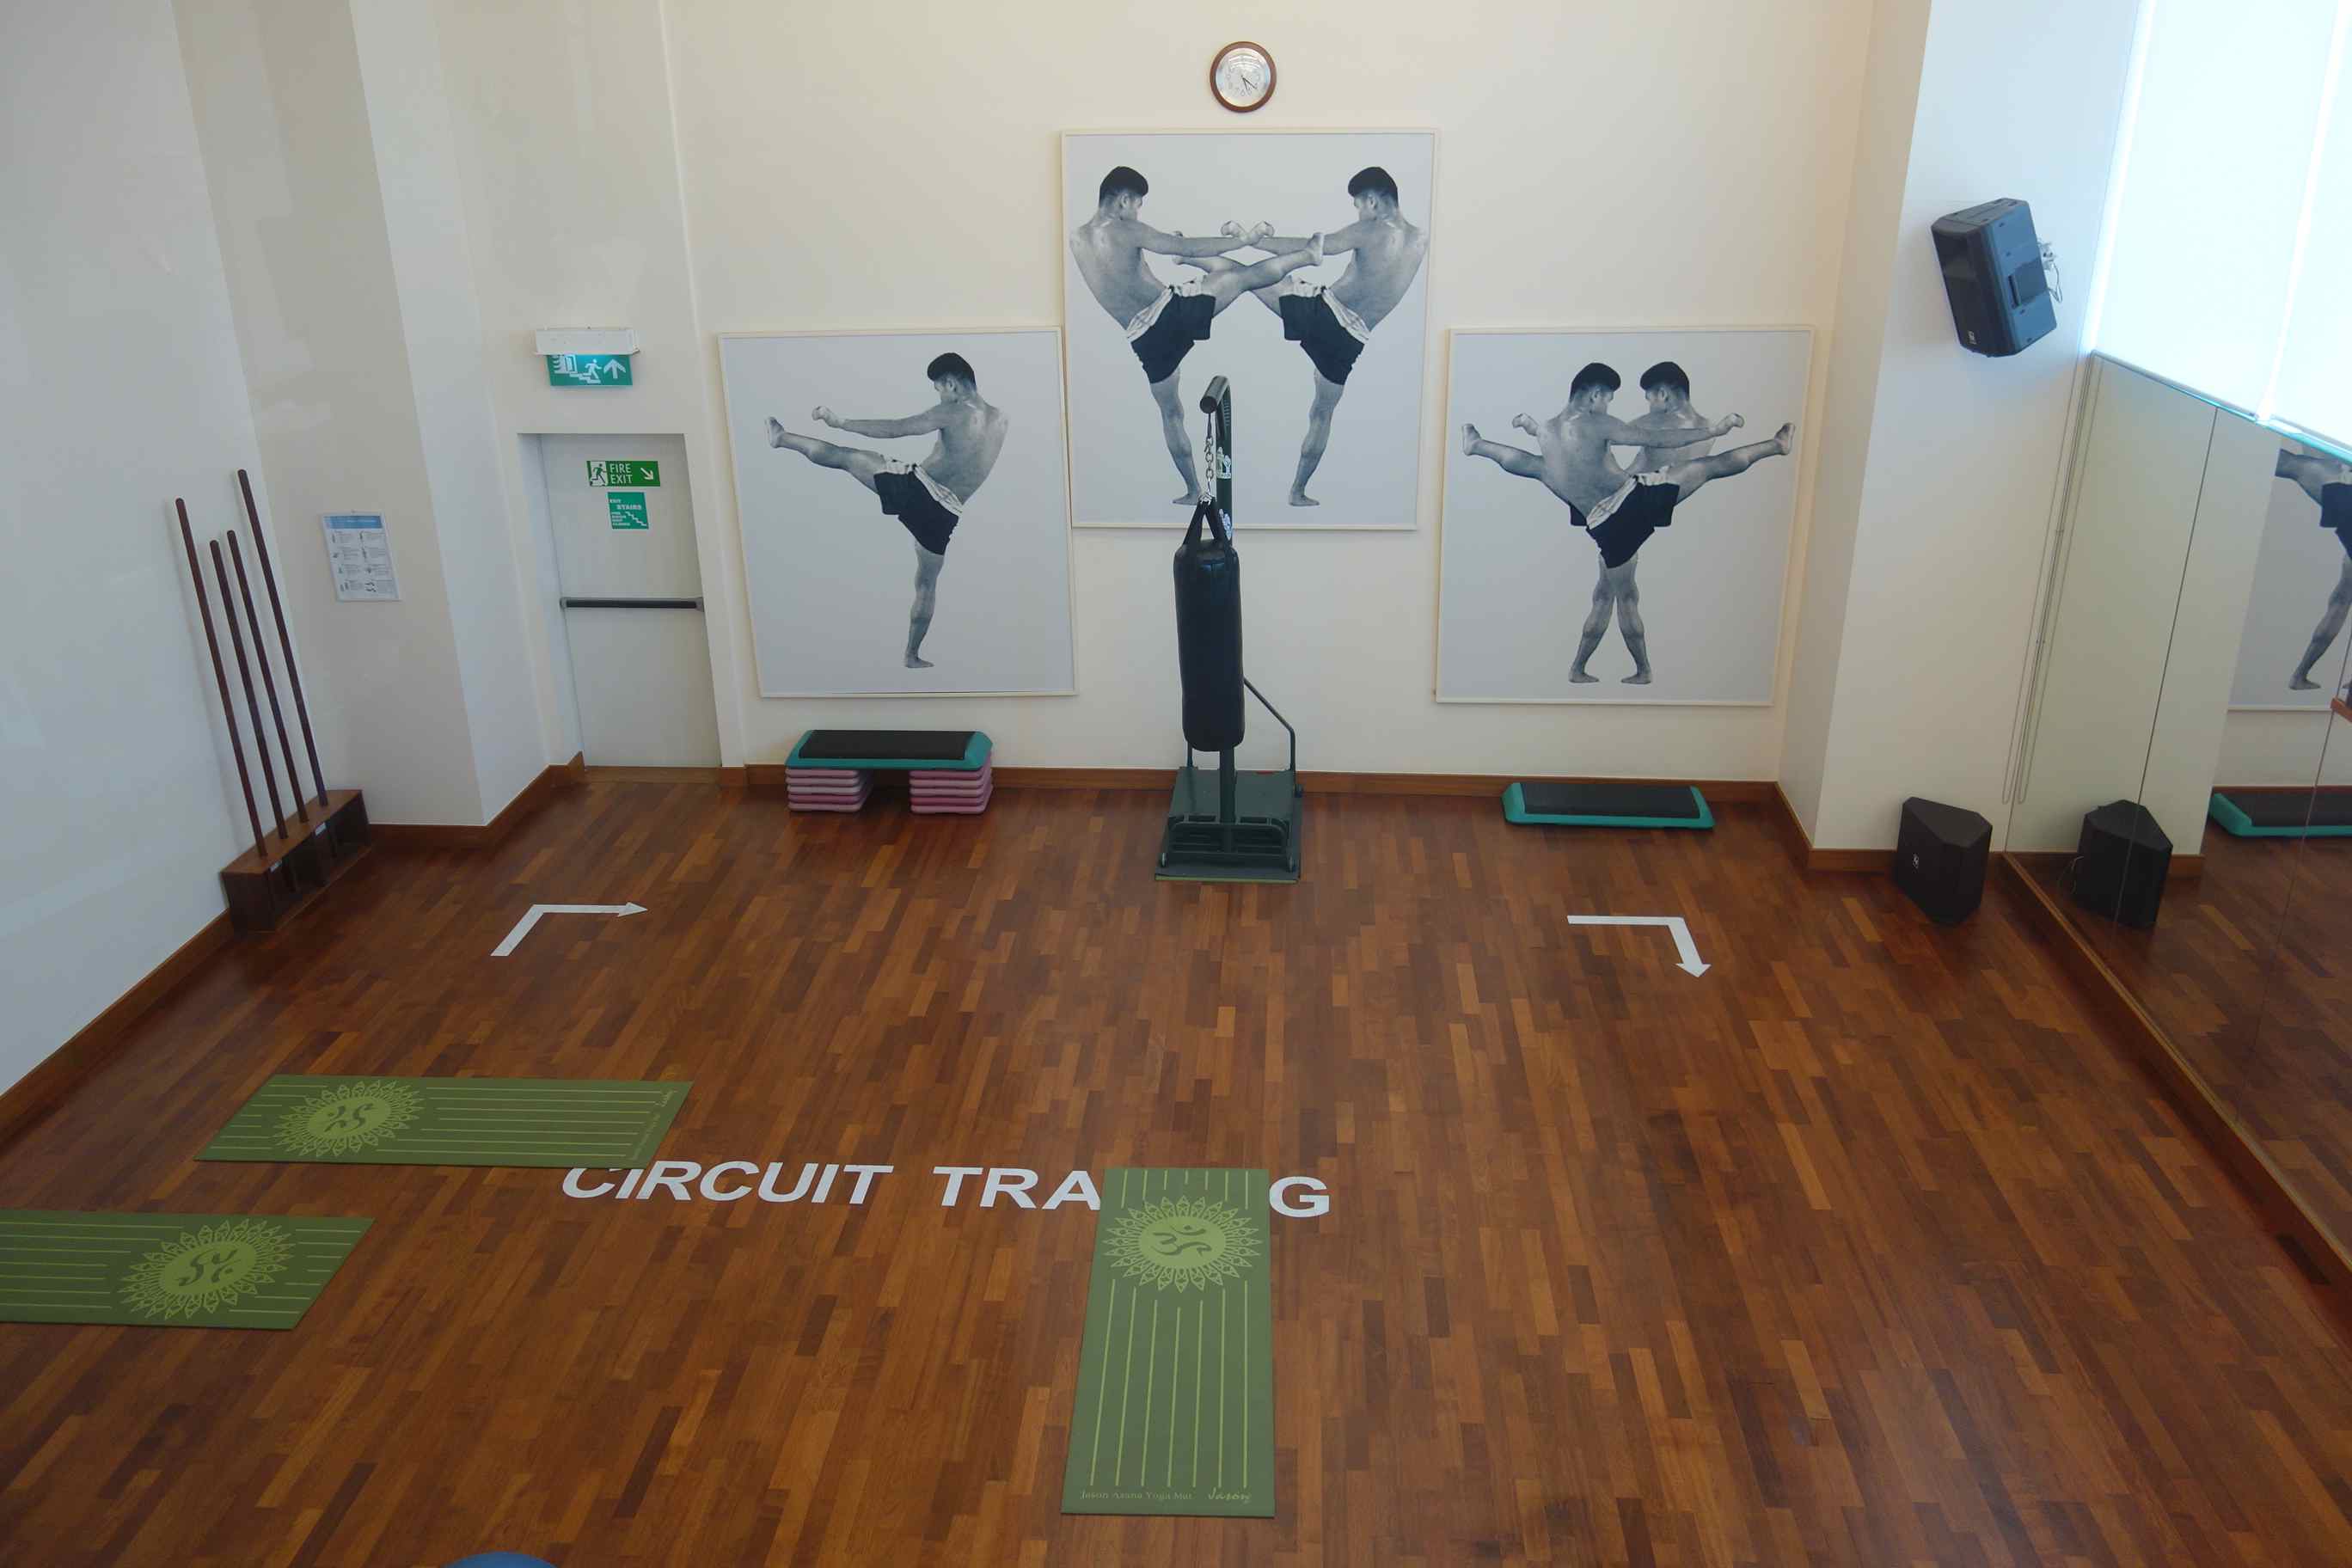 Multi-purpose room in the gym